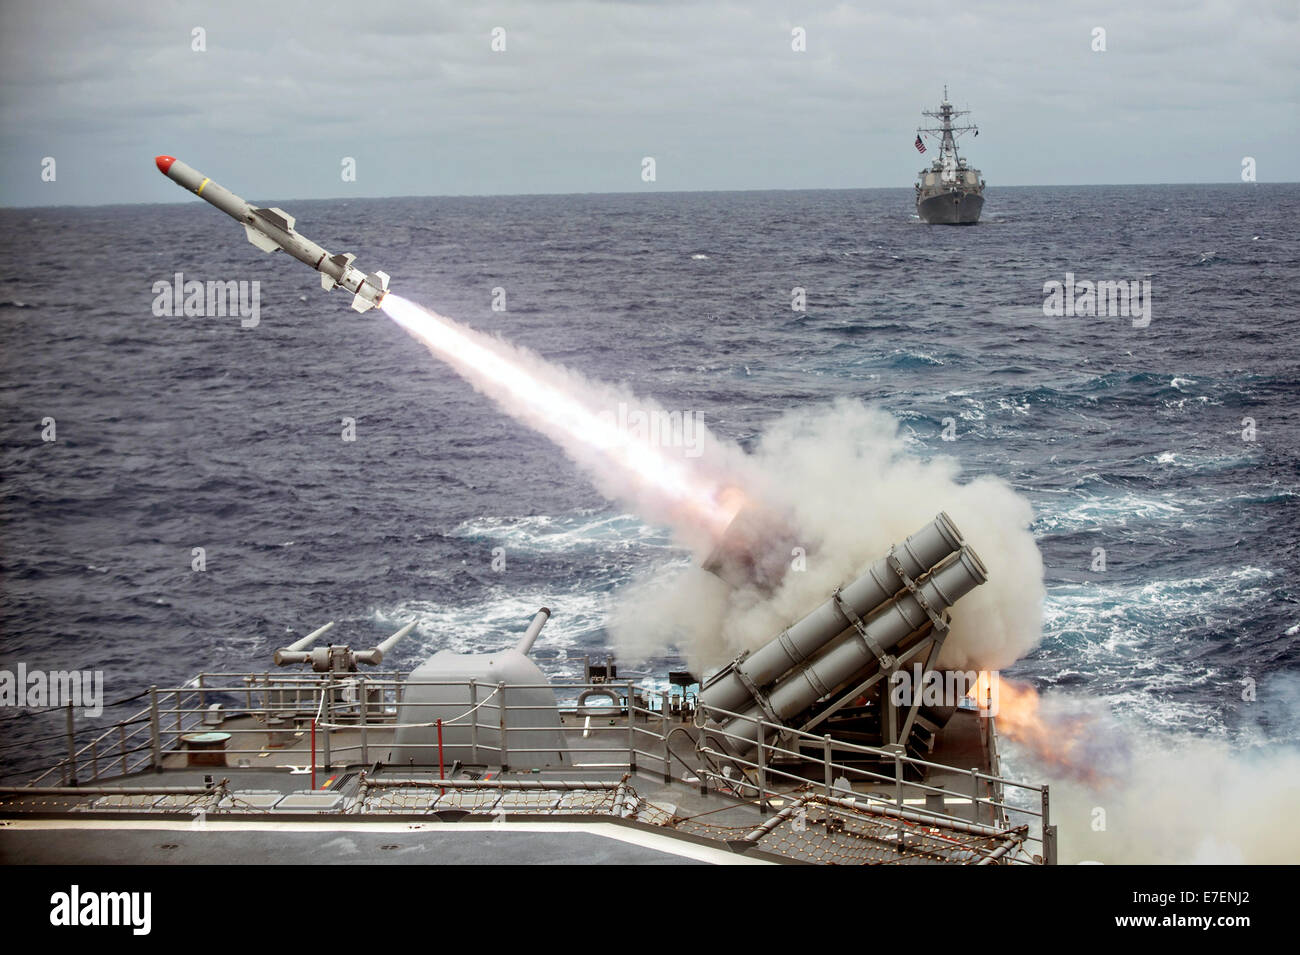 A Harpoon anti-ship missile is launched from the Ticonderoga-class guided-missile cruiser USS Shiloh during exercise Valiant Shield 2014 September 15, 2014 off the coast of Guam. Stock Photo